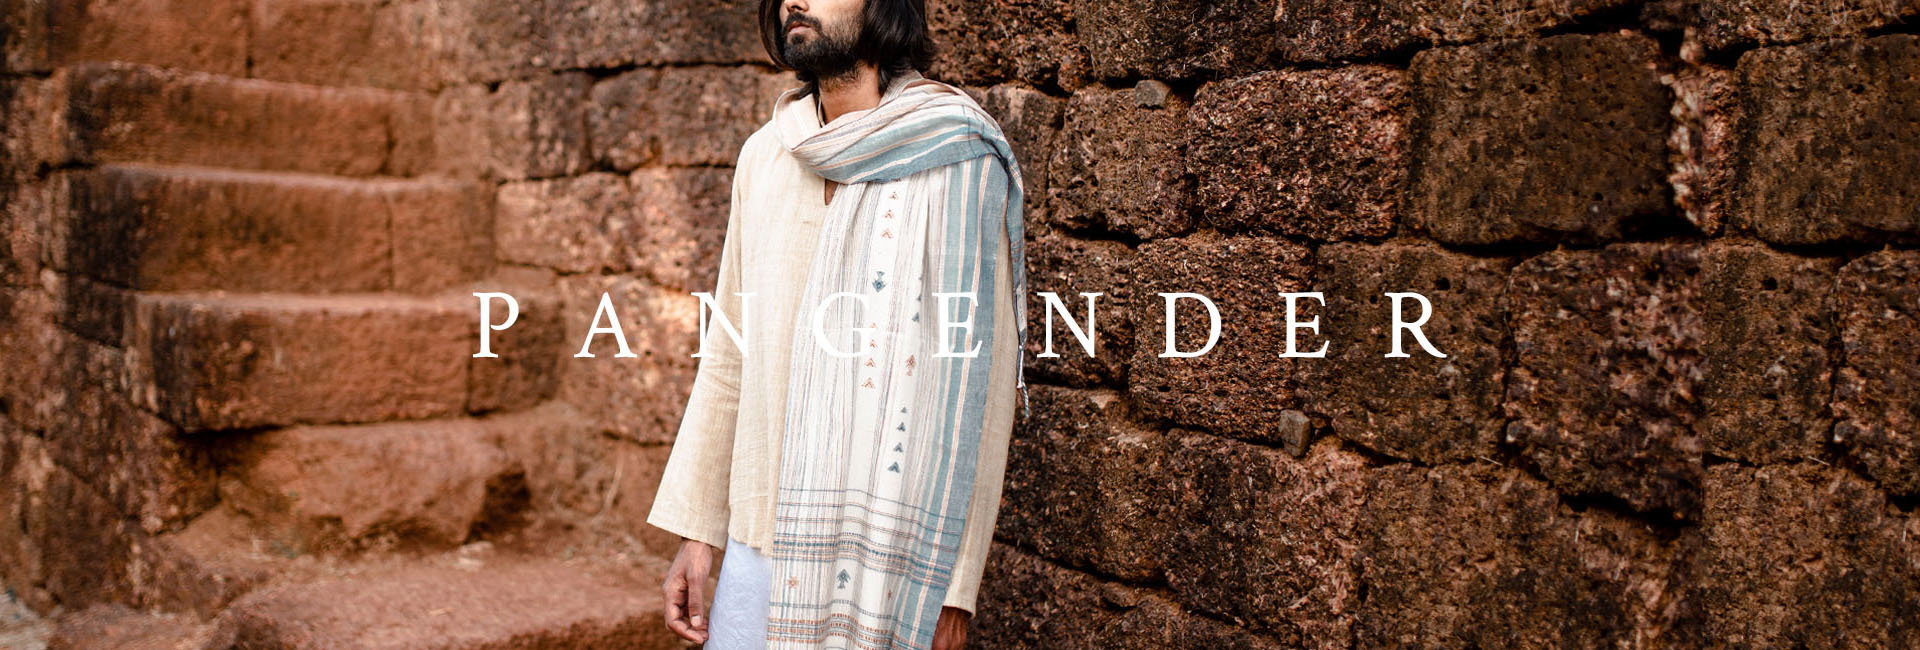 Shop Organic Pangender Clothing, sustainable clothing India, Organic handmade clothes, eco-friendly clothes, natural fiber clothing, women ethical clothing, natural fabric clothes, natural handmade clothing, sustainable lifestyle, handmade organic stoles, natural handmade bottoms, designer bottoms, Sepia Stories, Fashionable stoles pangender bottoms online, pangender stoles online handmade organic clothing, organic handmade clothing, alternate apparel, natural handmade accessories, sustainable lifestyle, natural fabrics, handcrafted clothing in India, handcrafted artisanal products, organic handmade clothing, handcrafted home décor products, fashion labels in India, eco-friendly clothing, natural organic clothes, cruelty free products, organic fabrics, natural materials, eco-friendly clothing brands, guiltfree fashion, organic clothing range, sustainable linen clothing, Indian handcrafted artistry, natural fabric clothes, natural dyeing techniques, shop handmade accessories, socially conscious brands, upcycled materials, contemporary handcrafted home décor, handmade home accessories, home décor ideas, exquisite hand embroideries, luxurious handwoven textures, zero waste personal care, curated range of organic products, personal care range, zero-waste mission, 100% recycled materials stationary, friendly online store, 100% Natural fashion accessories, vegan brand, sepia stories, gender neutral clothing